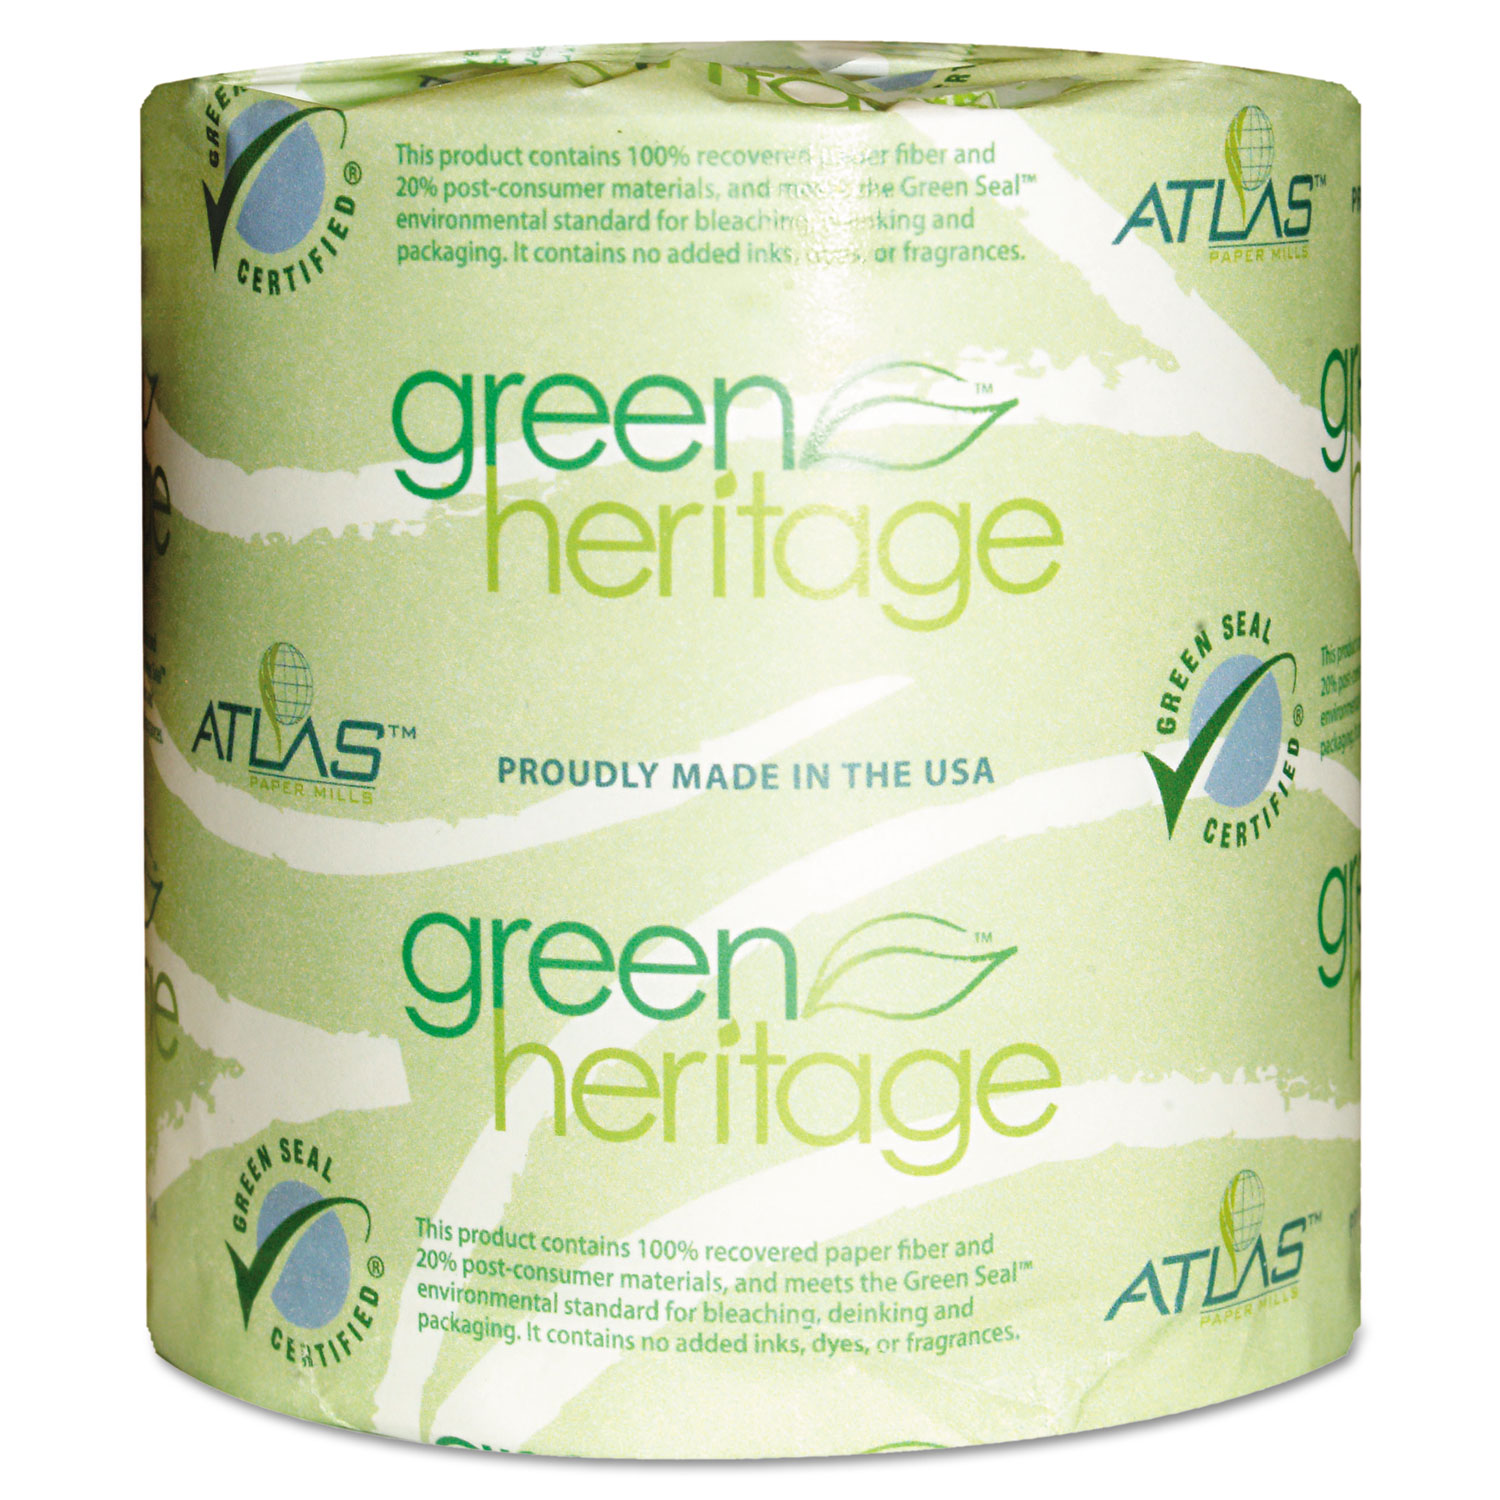 Green Heritage Toilet Tissue, 4.4 x 4.4 Sheets, 2-Ply, 500/Roll, 80 Rolls/CT